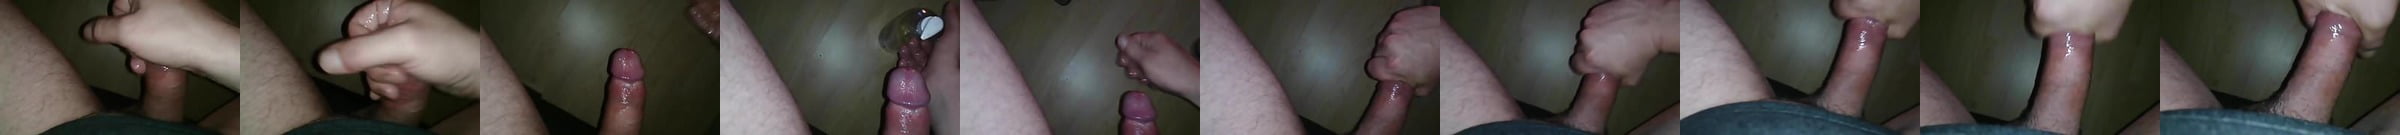 Featured Glans Gay Porn Videos 4 Xhamster